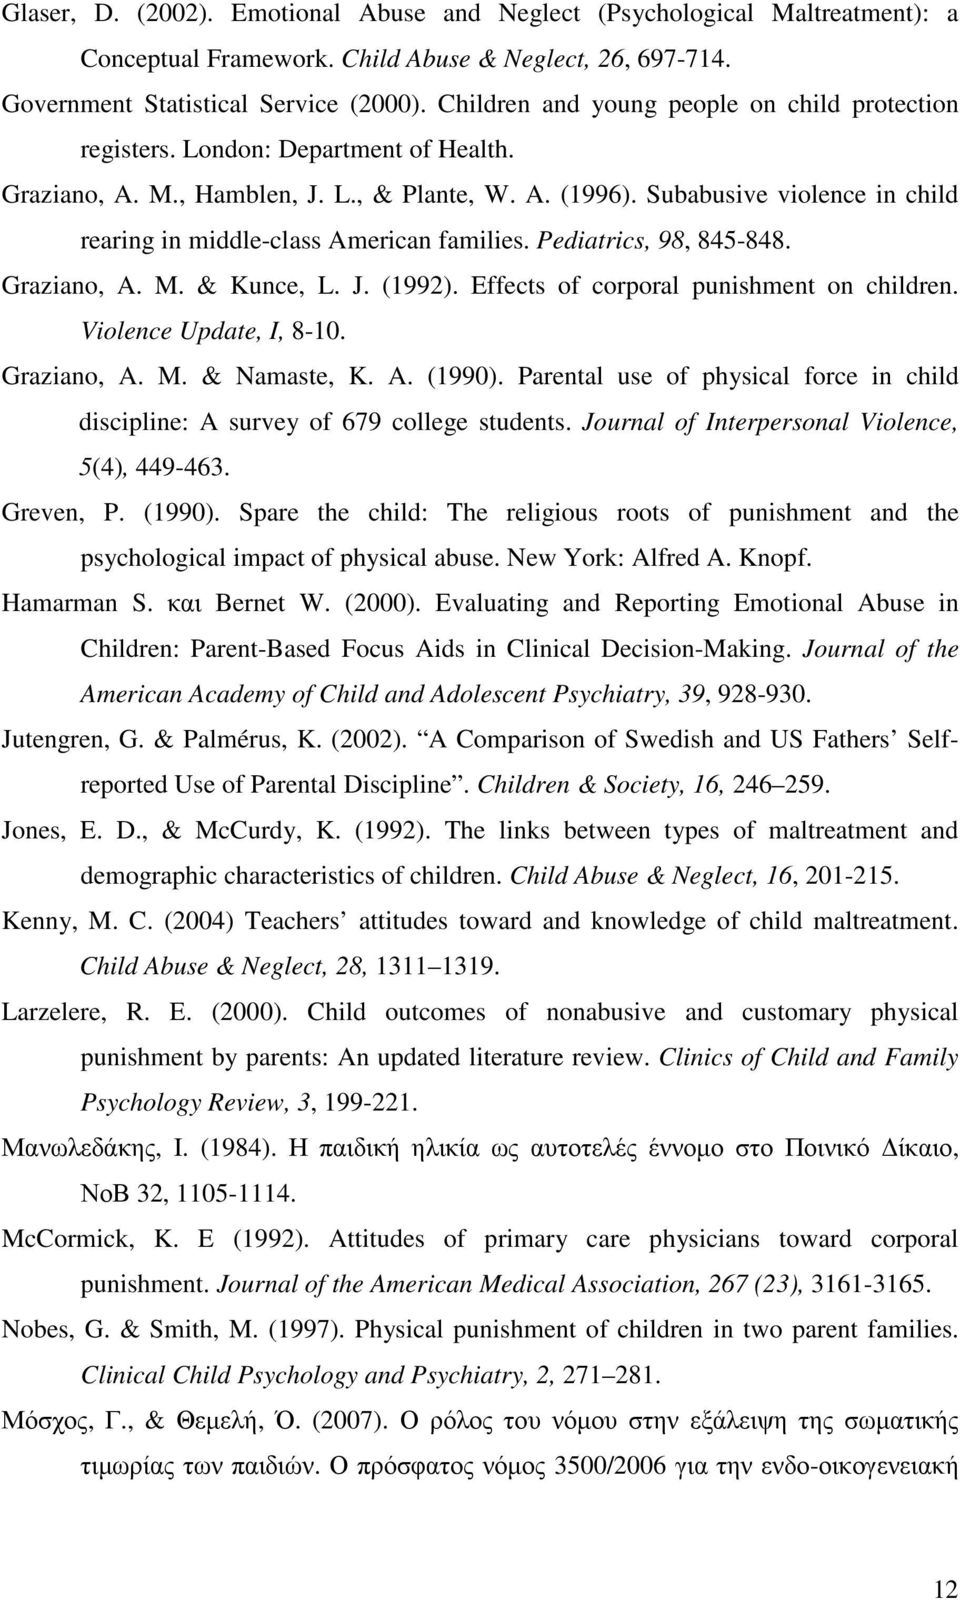 Subabusive violence in child rearing in middle-class American families. Pediatrics, 98, 845-848. Graziano, A. M. & Kunce, L. J. (1992). Effects of corporal punishment on children.